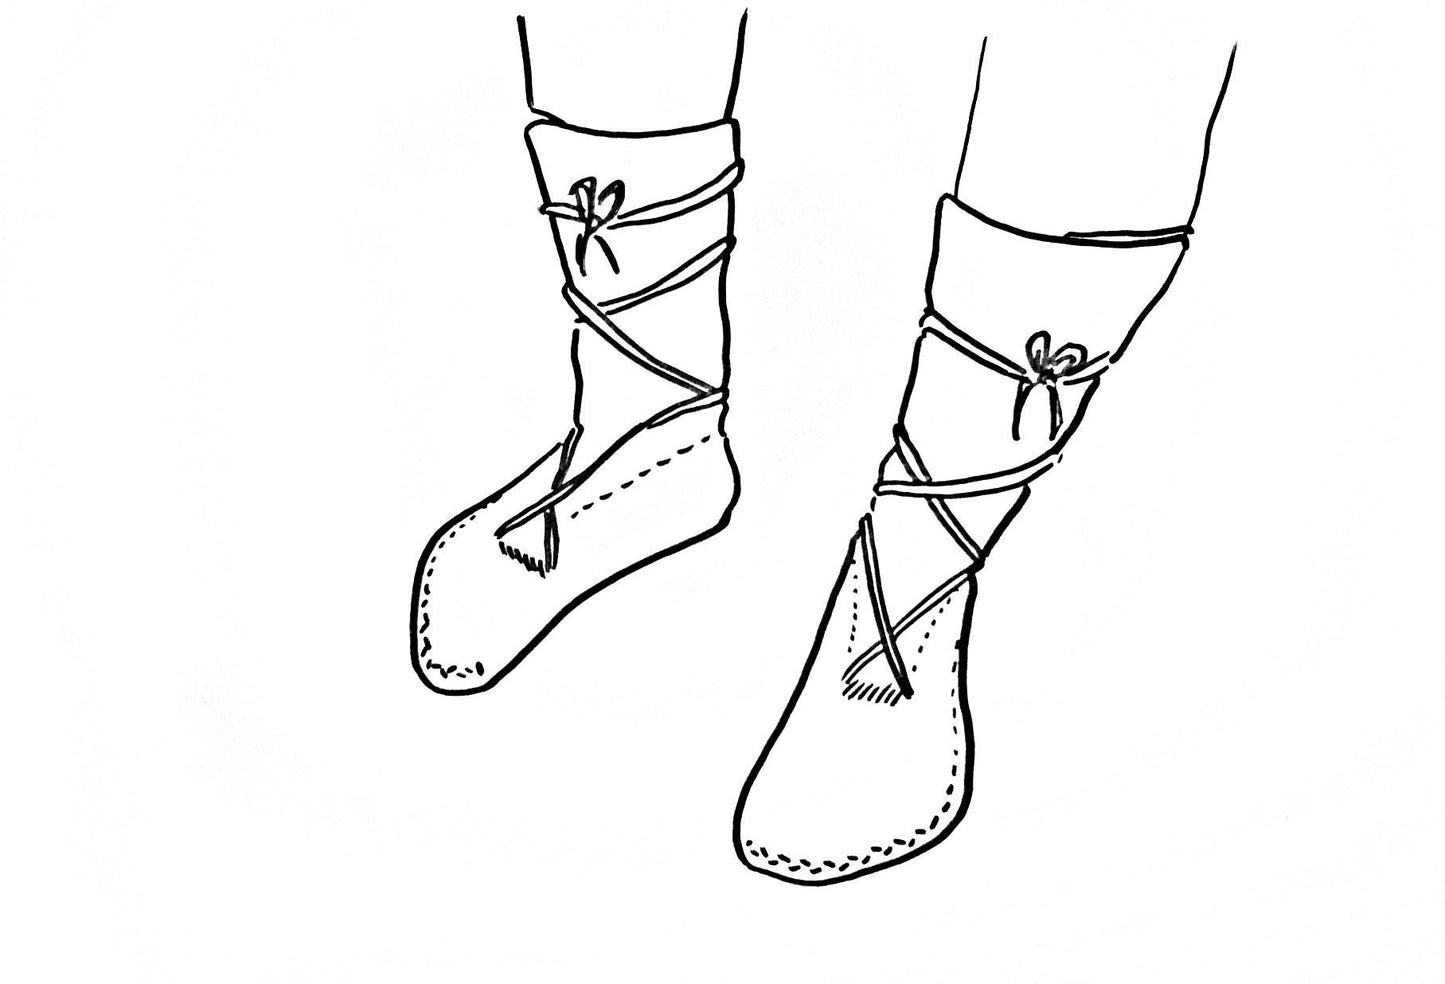 Barefoot-Boots With Laces - 3 Height Options: Ankle Boots / Low Boots / High Boots Earthingmoccasins